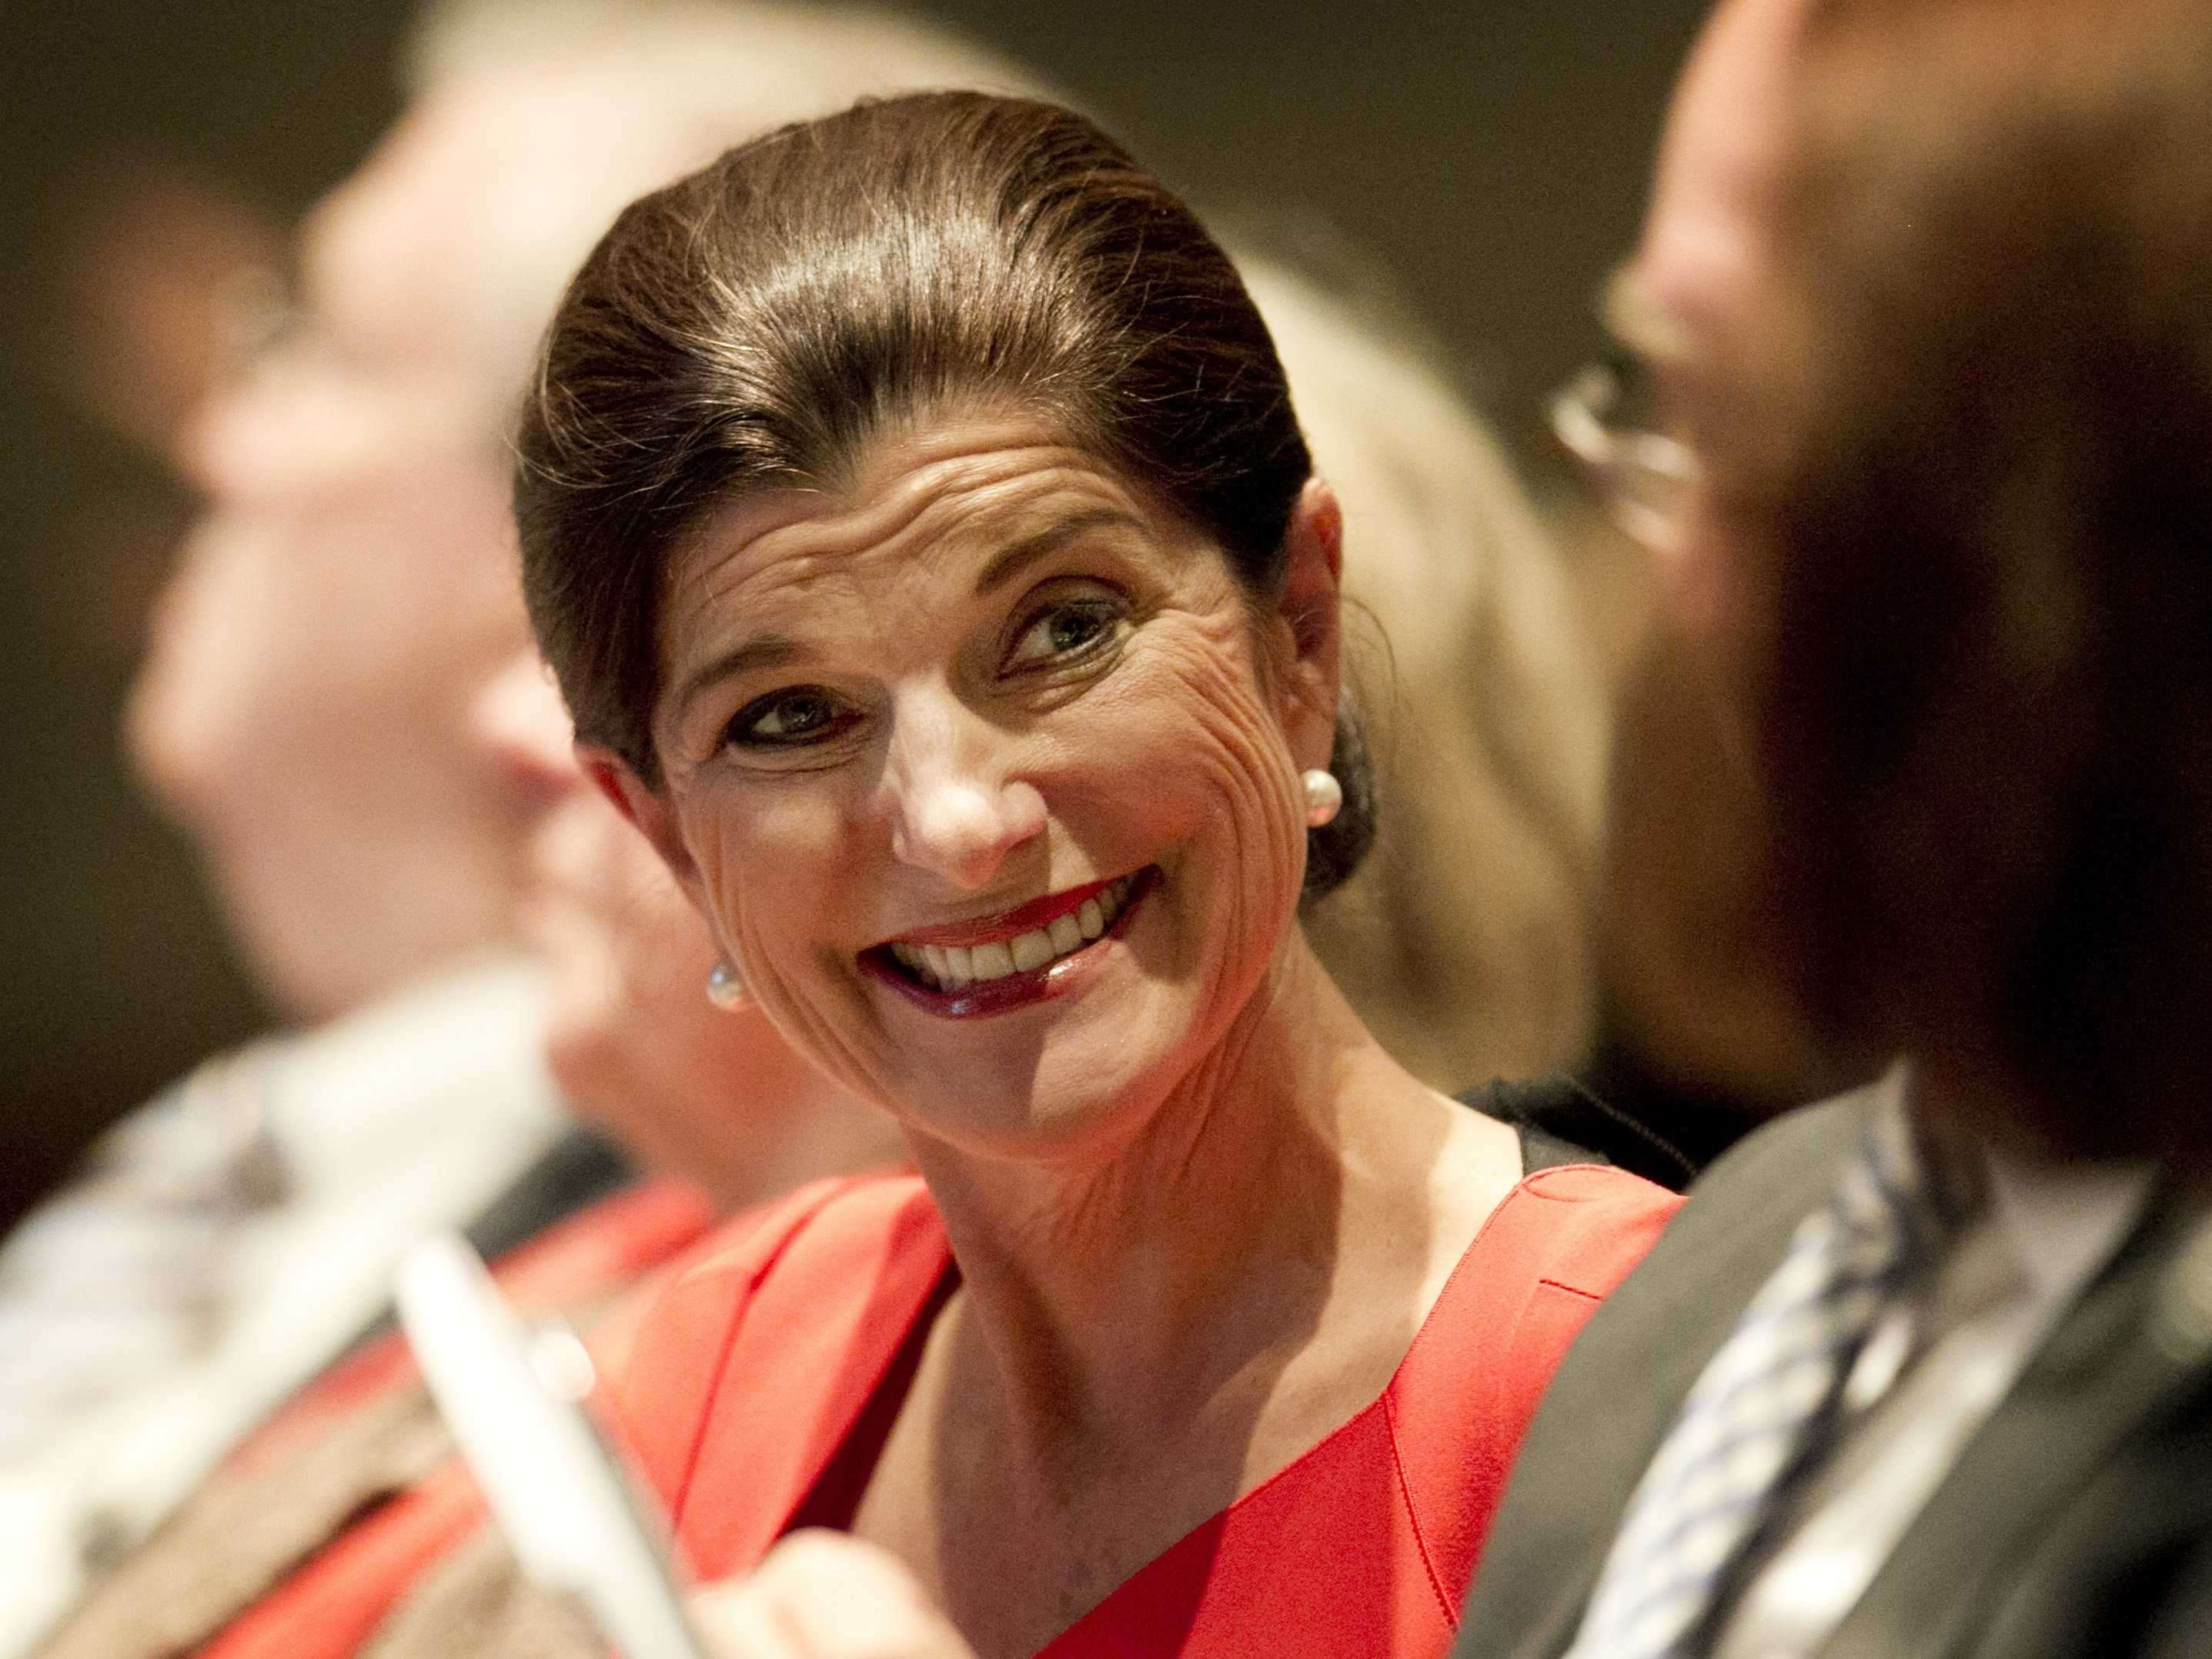 Luci Baines Johnson chairs the private holding company her mother